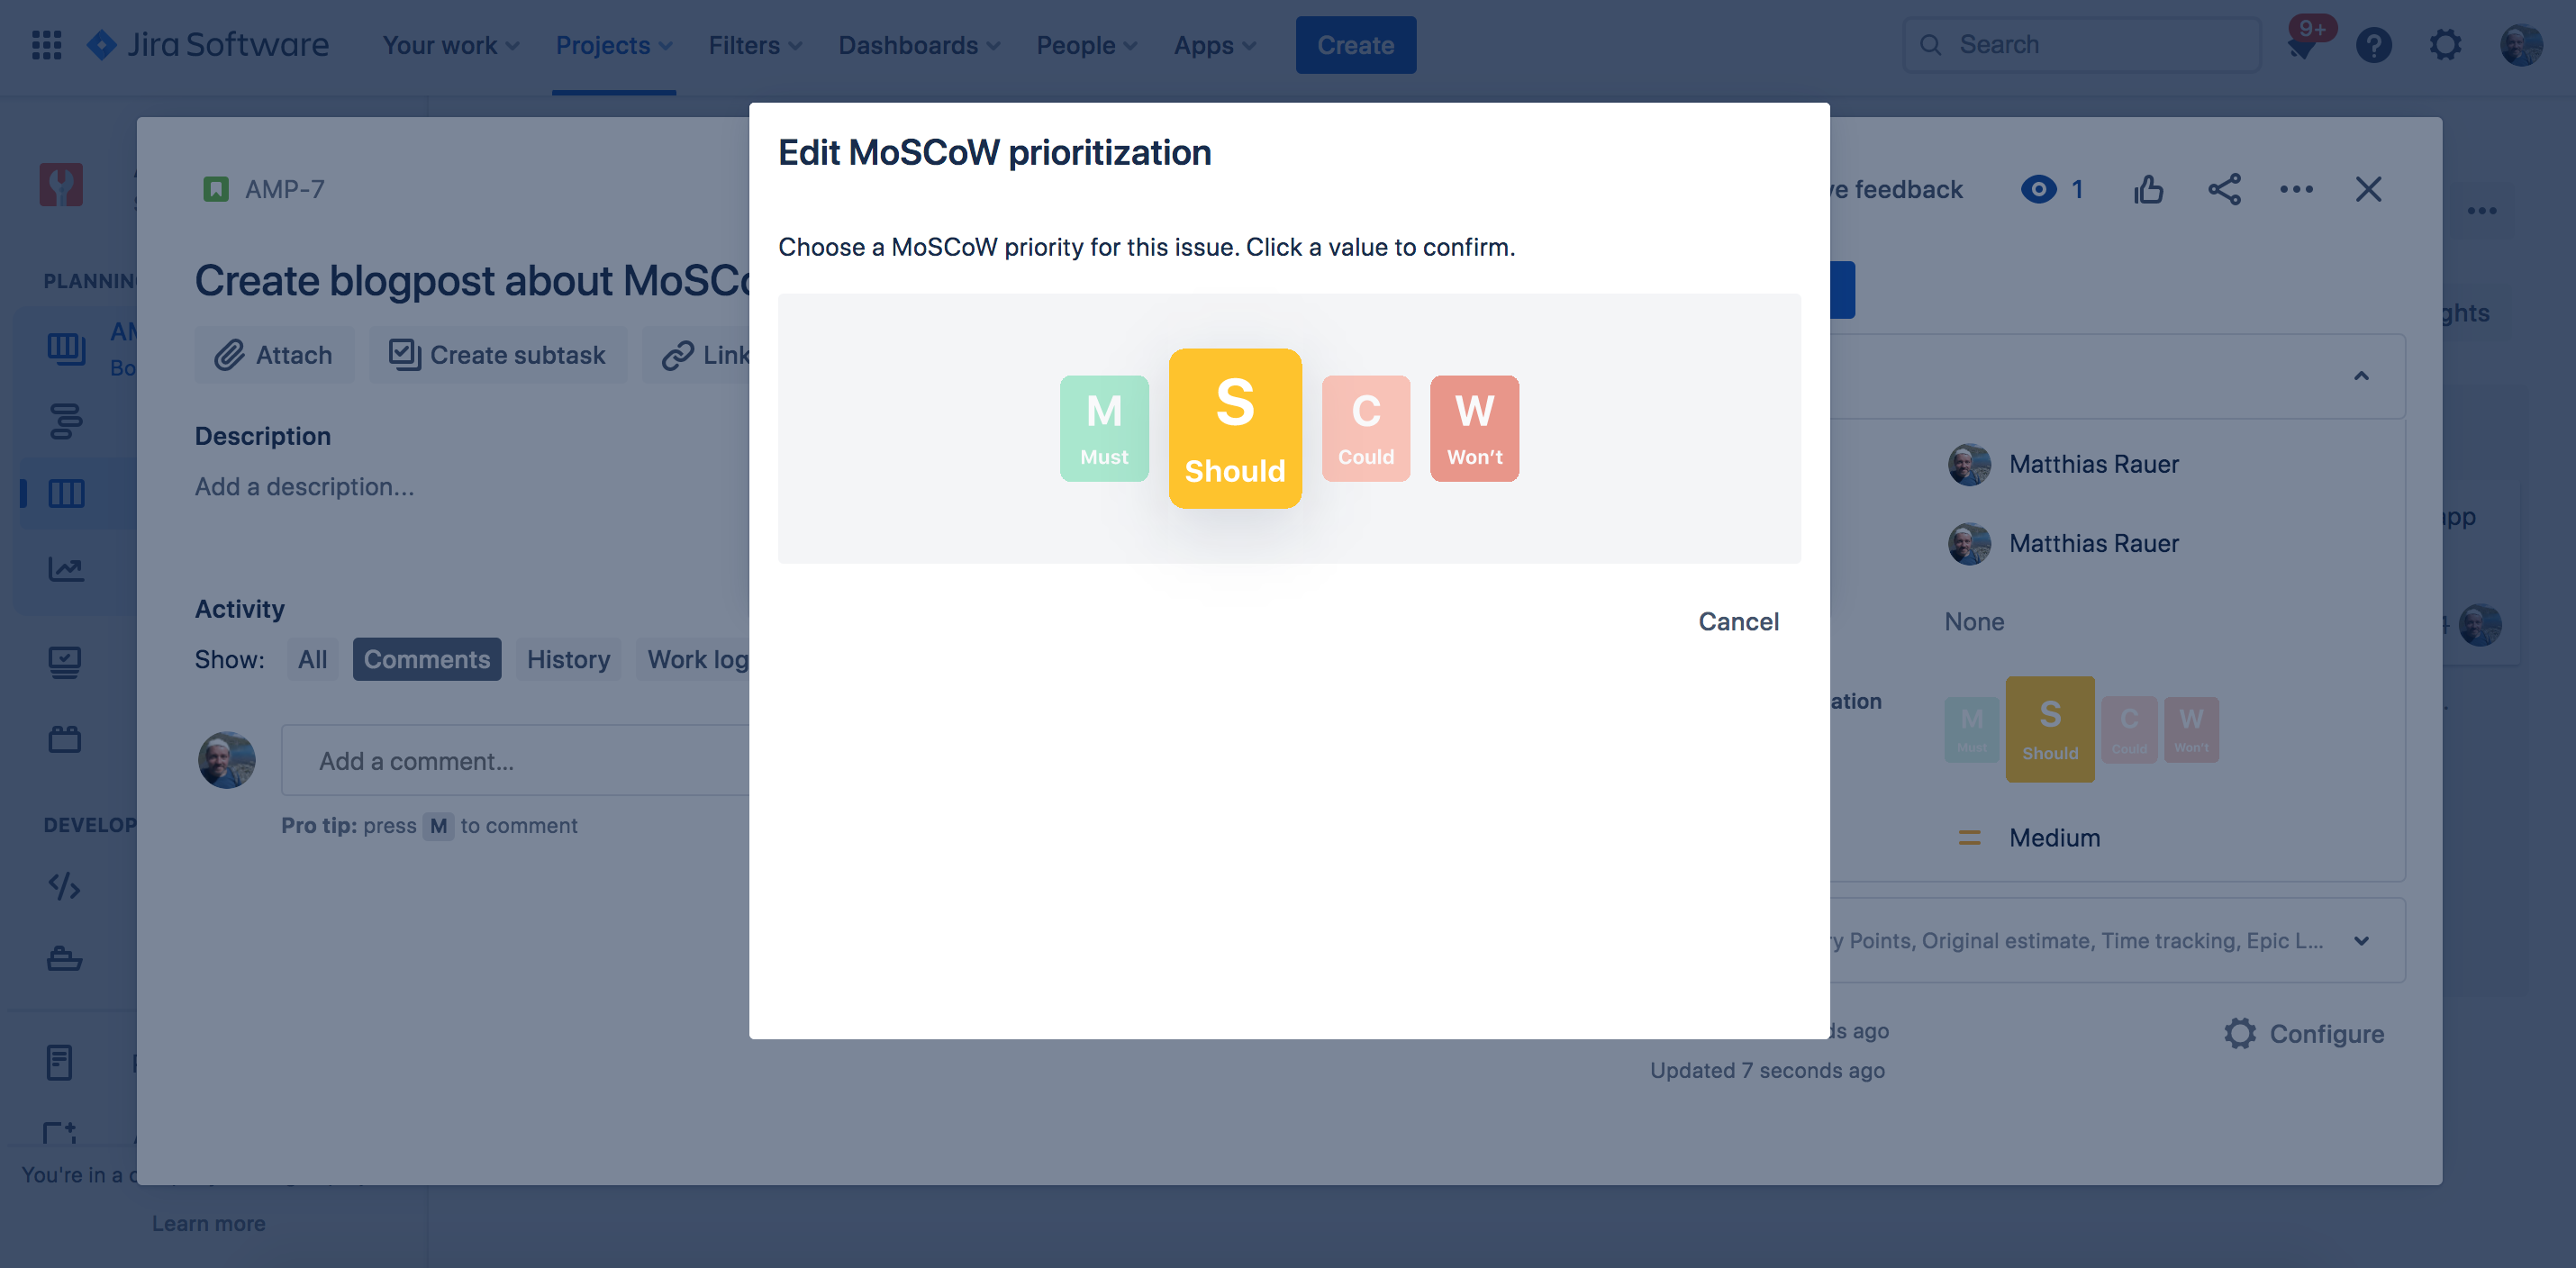 The MoSCoW method: Intuitively understandable prioritizations - also visible in Jira - Choosing a MoSCoW priority in Jira